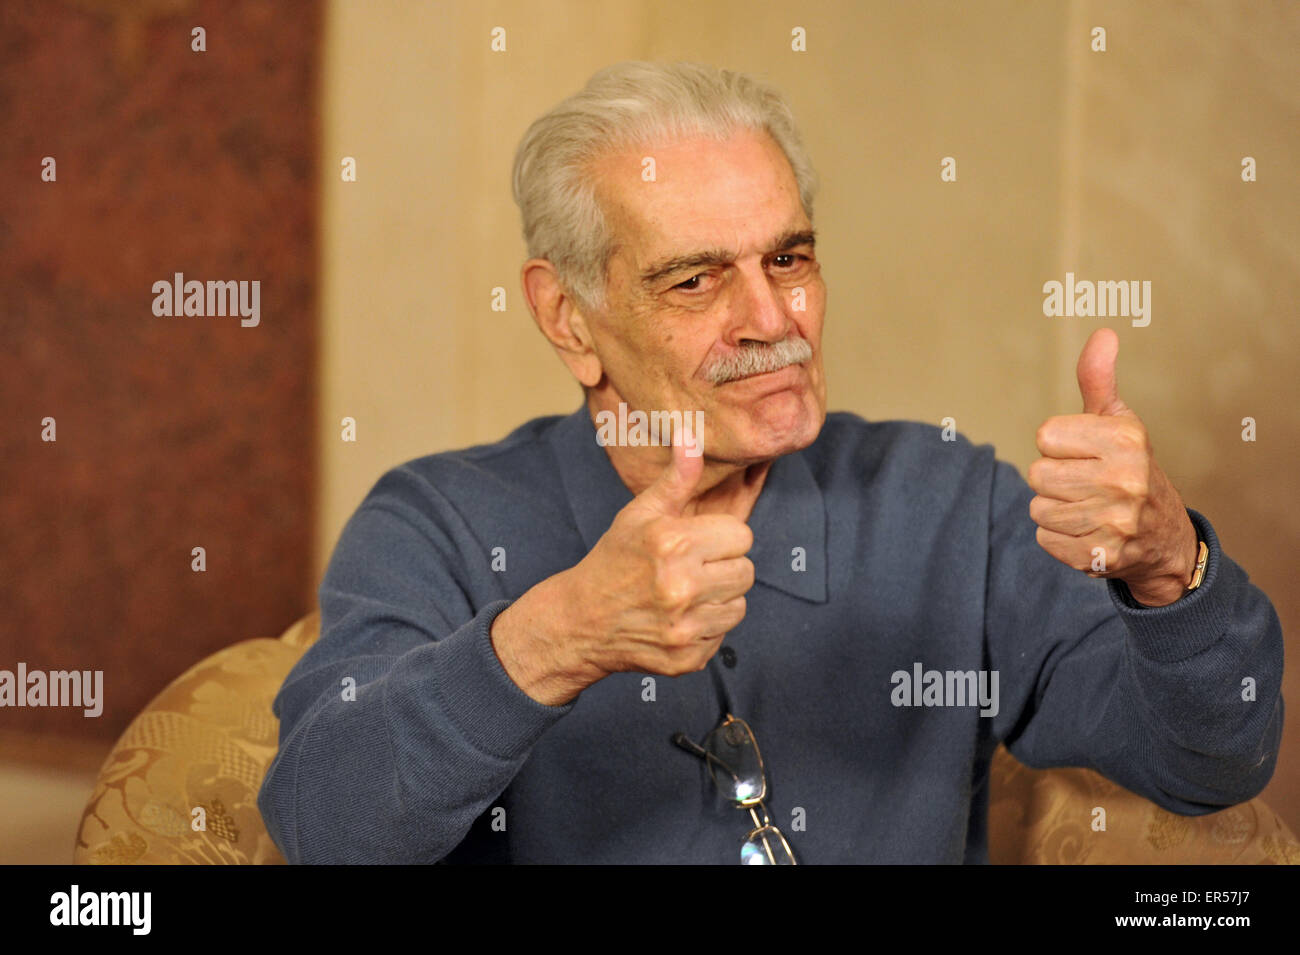 May 27, 2015 - Actor OMAR SHARIF, who starred in Lawrence of Arabia and Doctor Zhivago in the 1960s, has been diagnosed with Alzheimer's disease. The 83-year-old star's agent confirmed the news. Pictured: March 31, 2012 - Moscow, Russia - March 31, 2012. - Russia, Moscow. - Omar Sharif at Federation Fund Charity Event at the Ukraina Hotel. Credit:  PhotoXpress/ZUMAPRESS.com/Alamy Live News Stock Photo